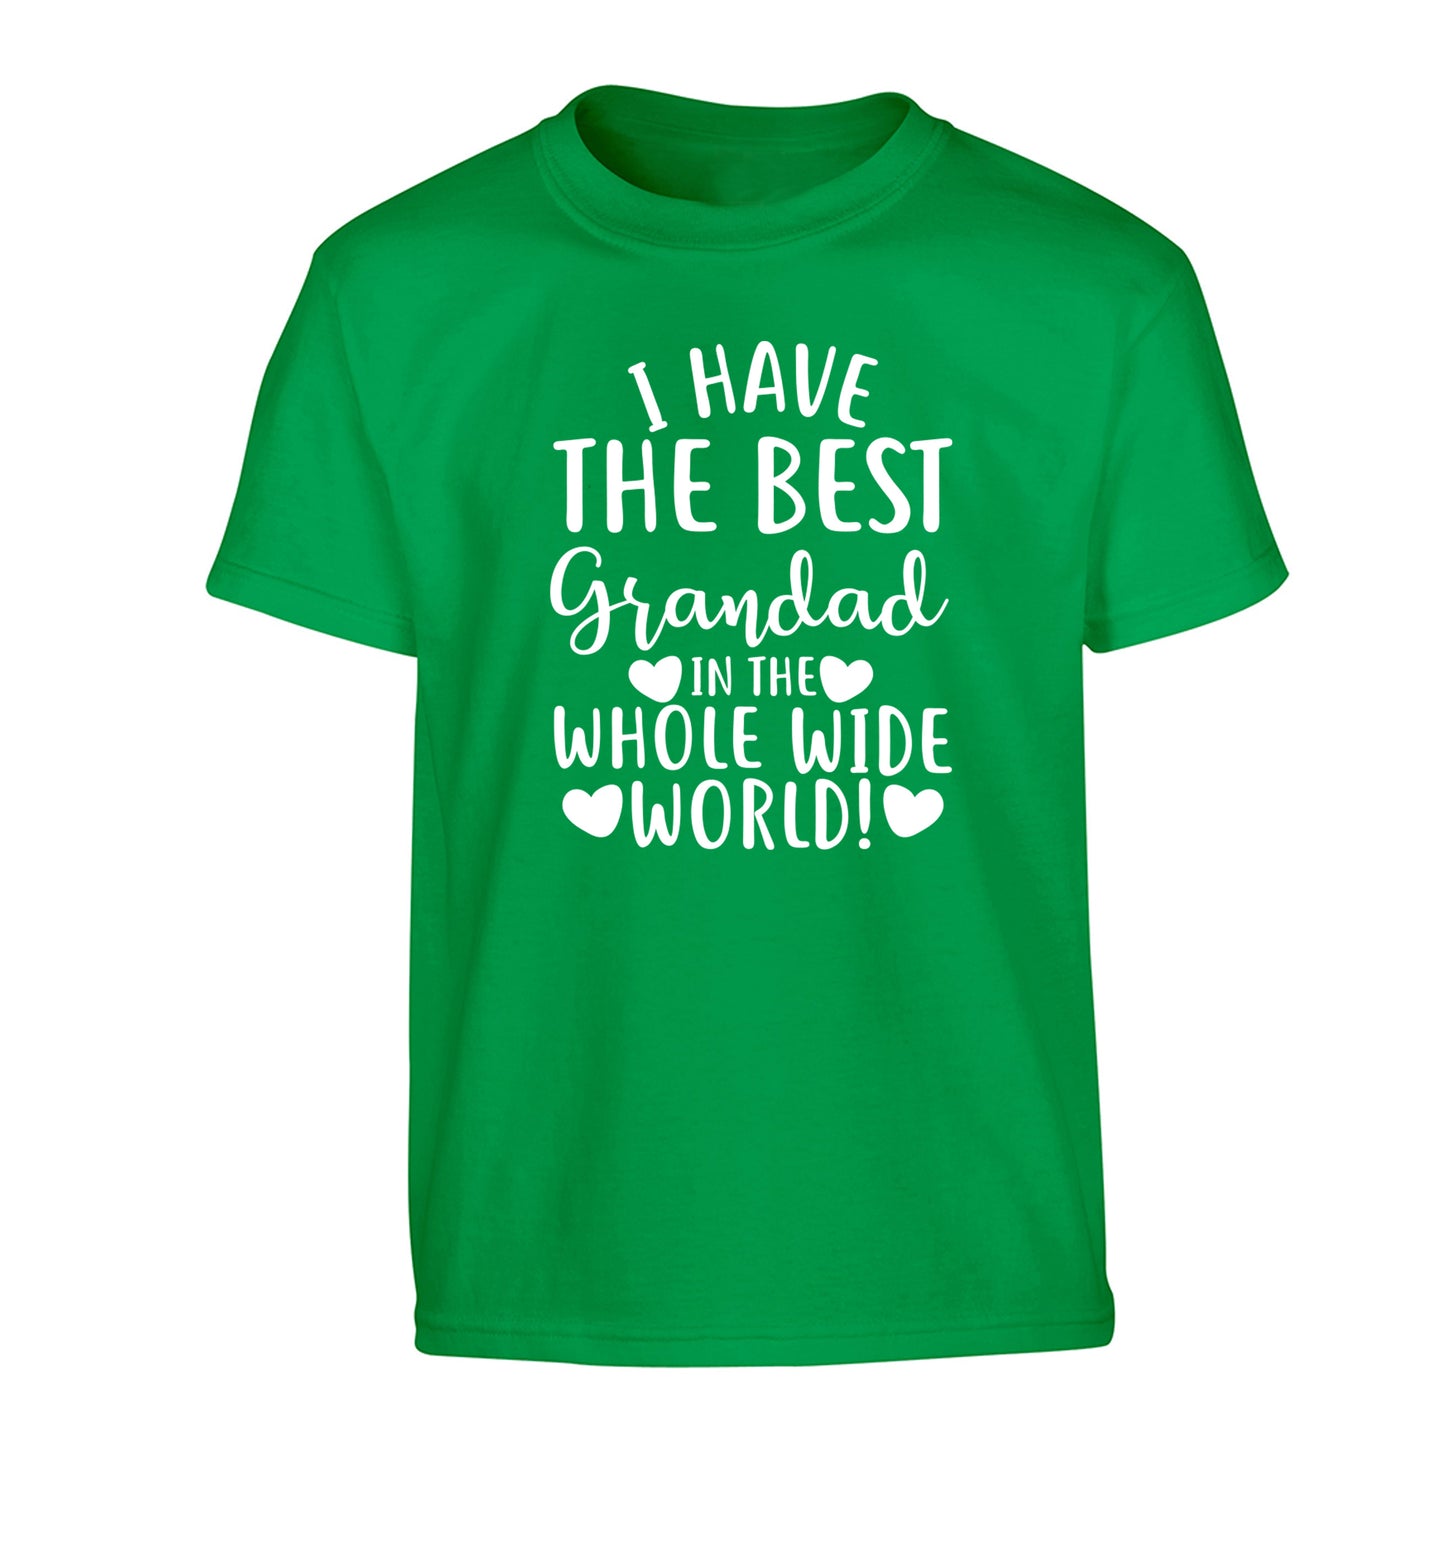 I have the best grandad in the whole wide world! Children's green Tshirt 12-13 Years